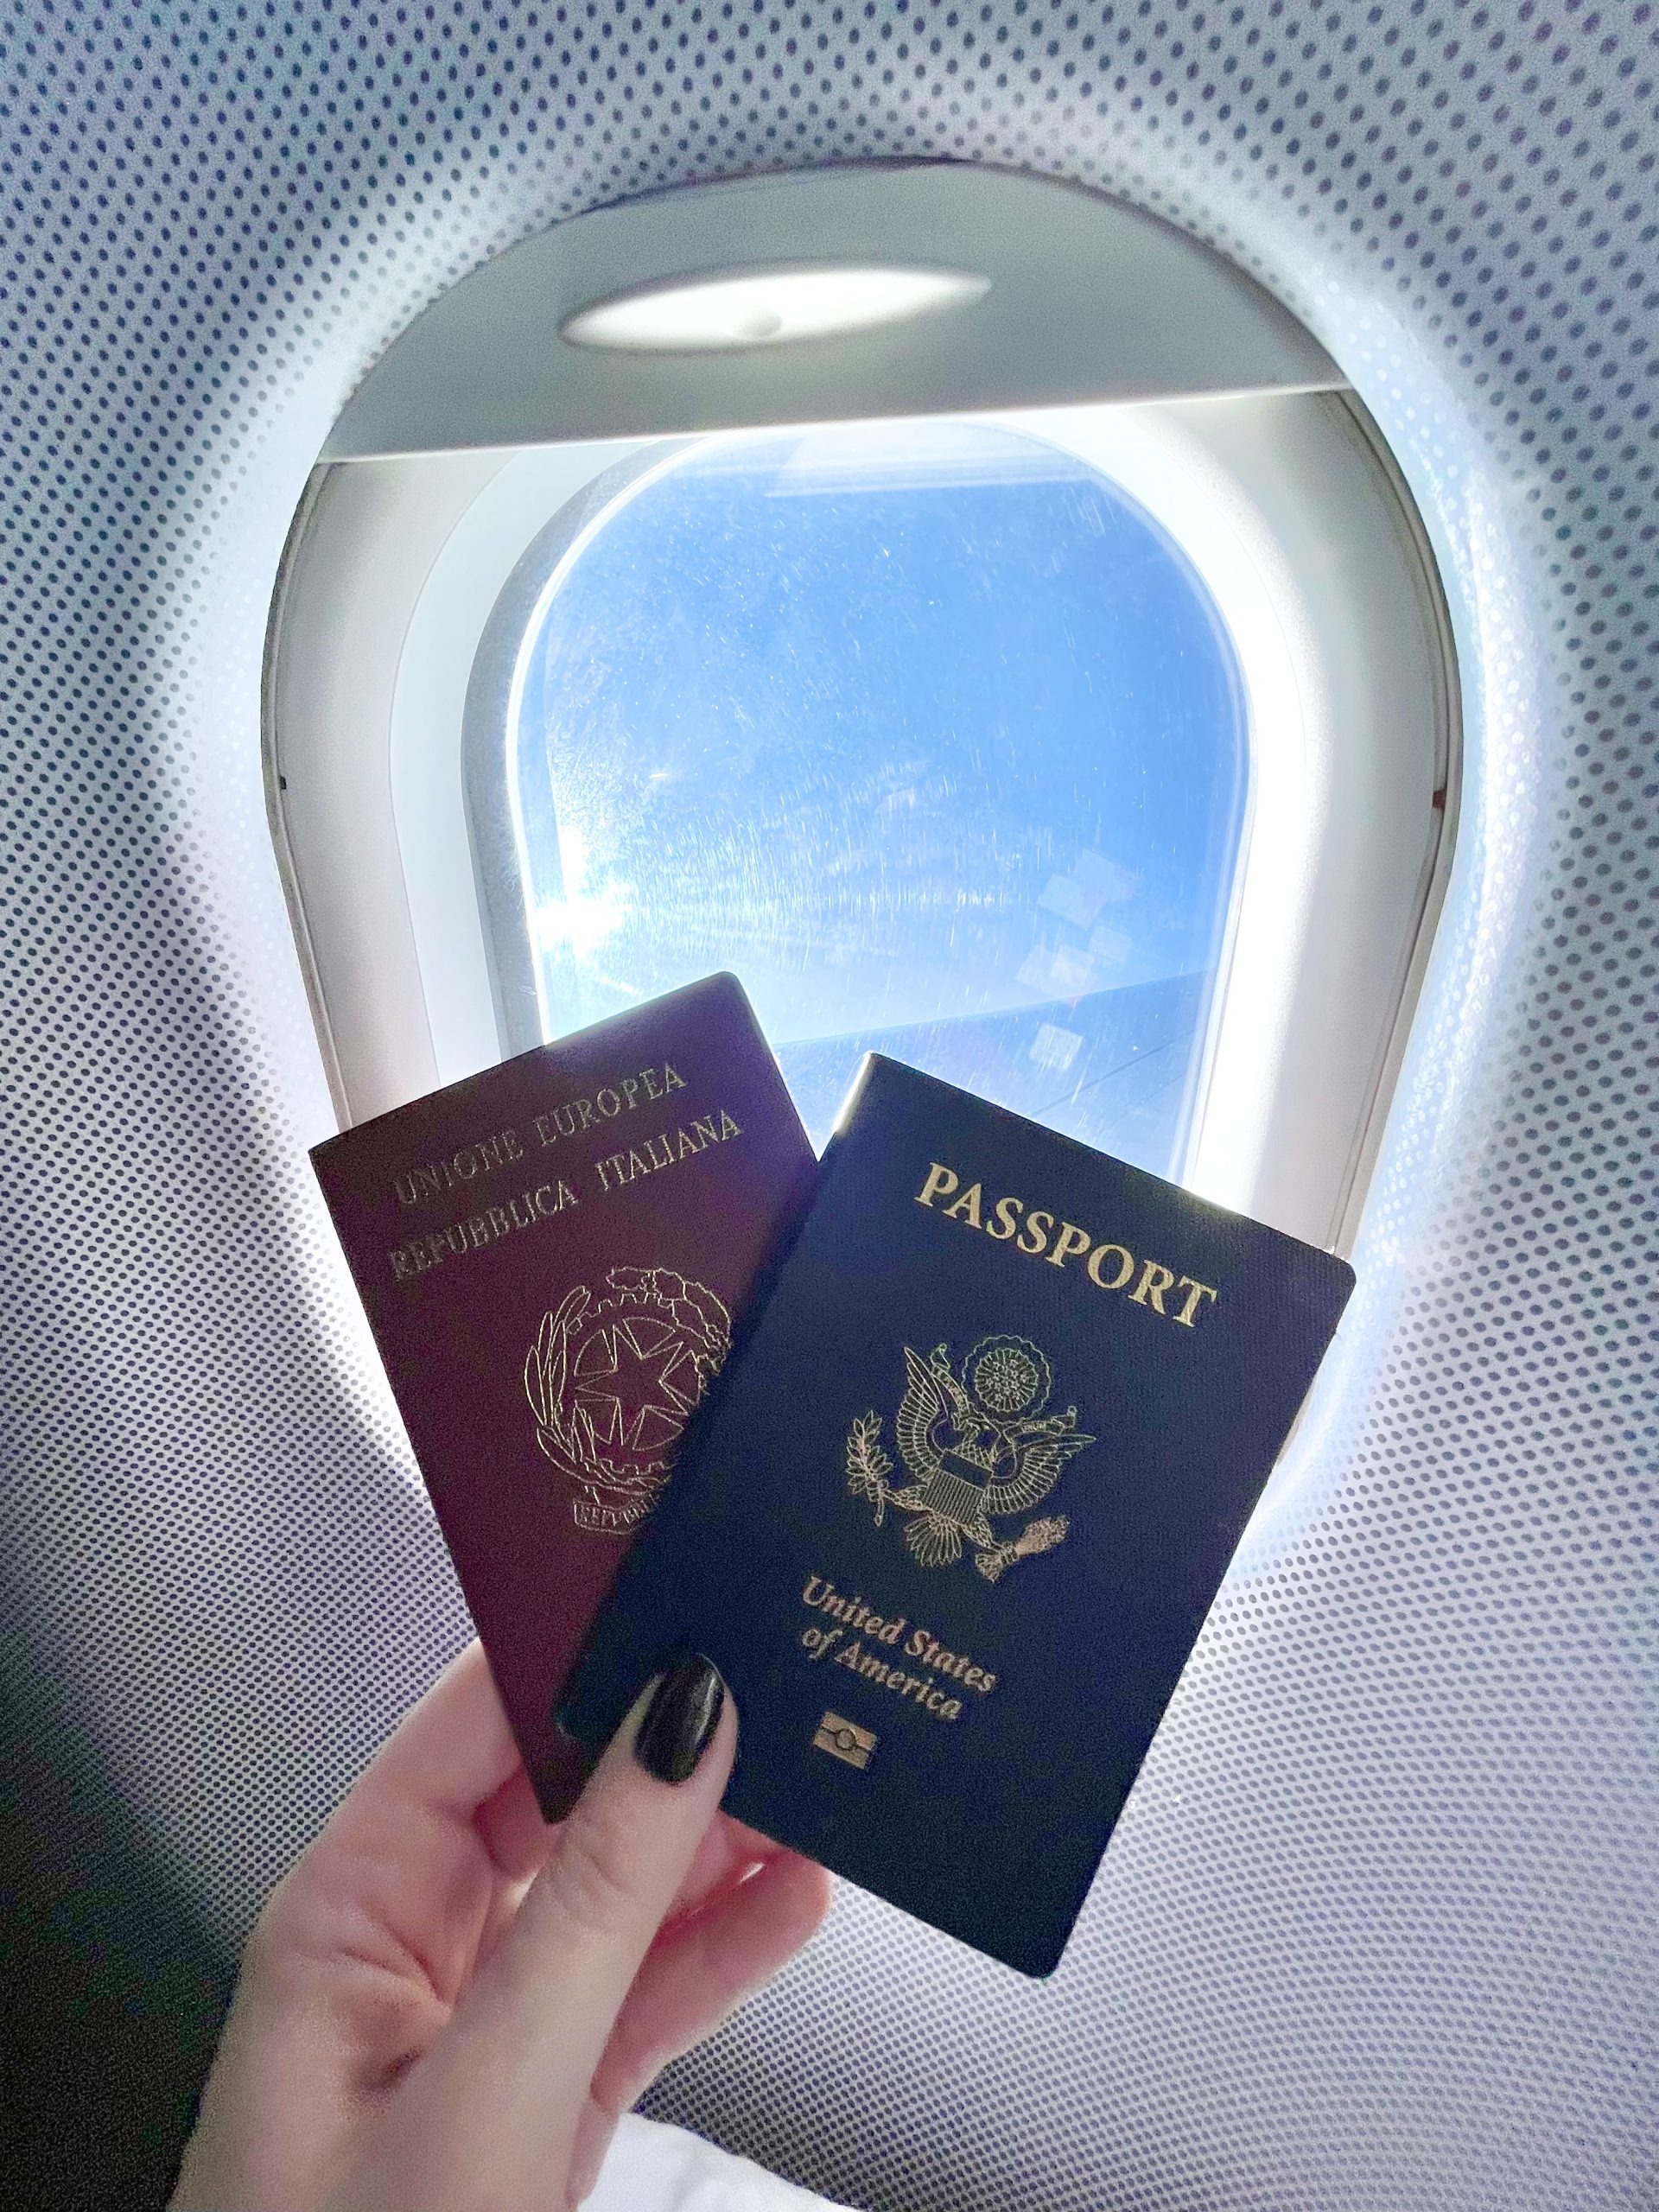 travelling with 2 passports